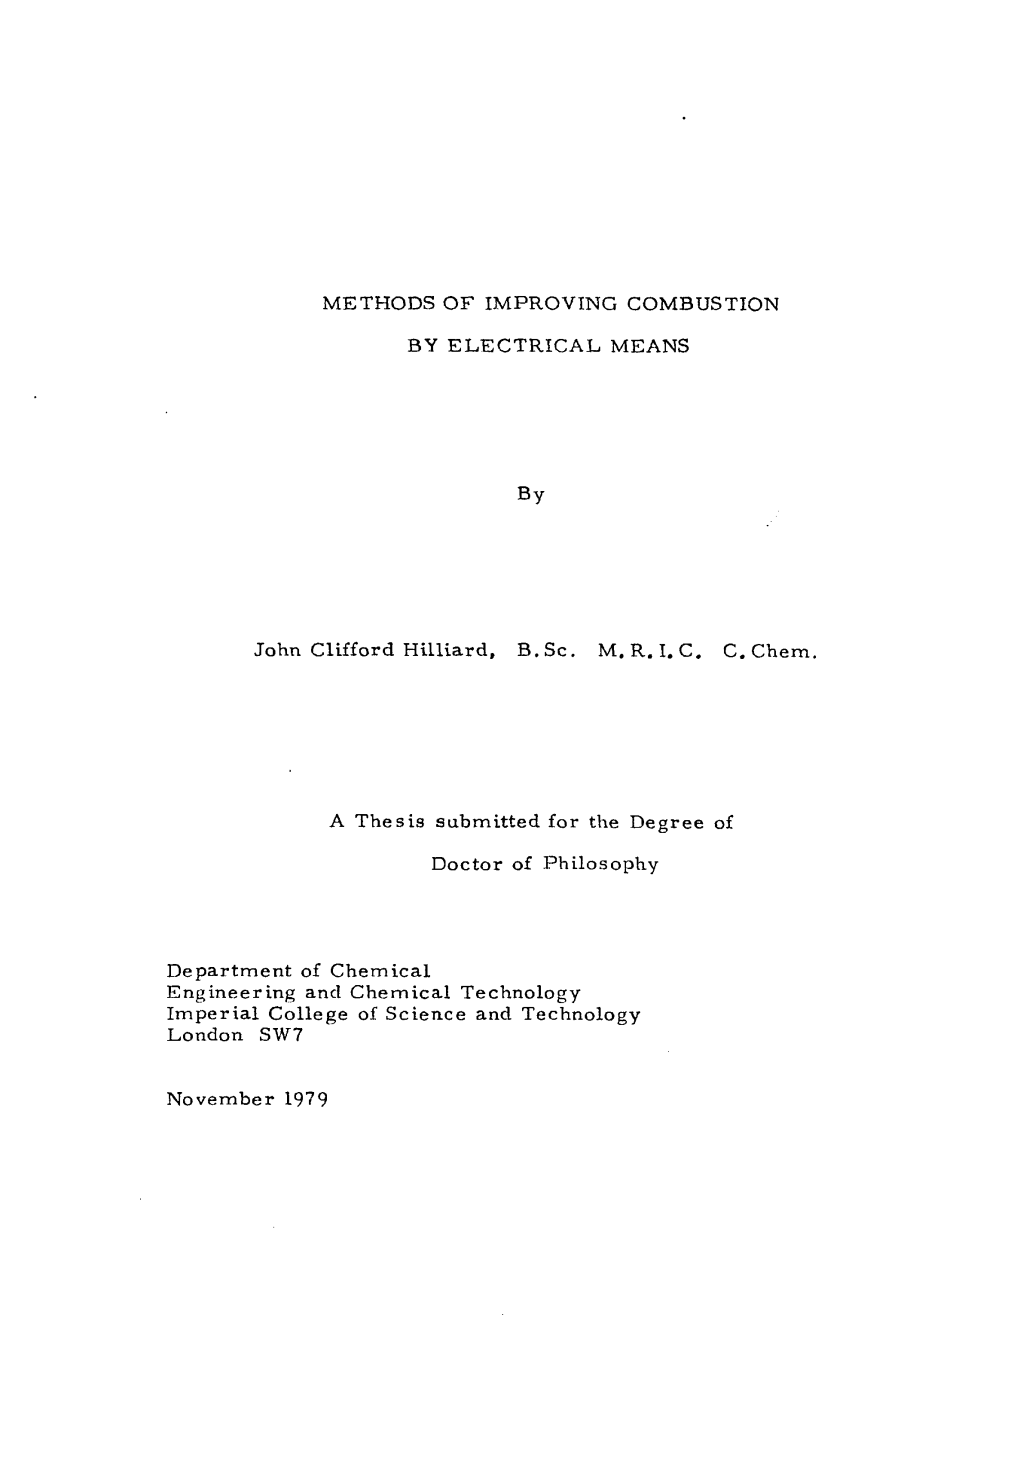 Methods of Improving Combustion by Electrical